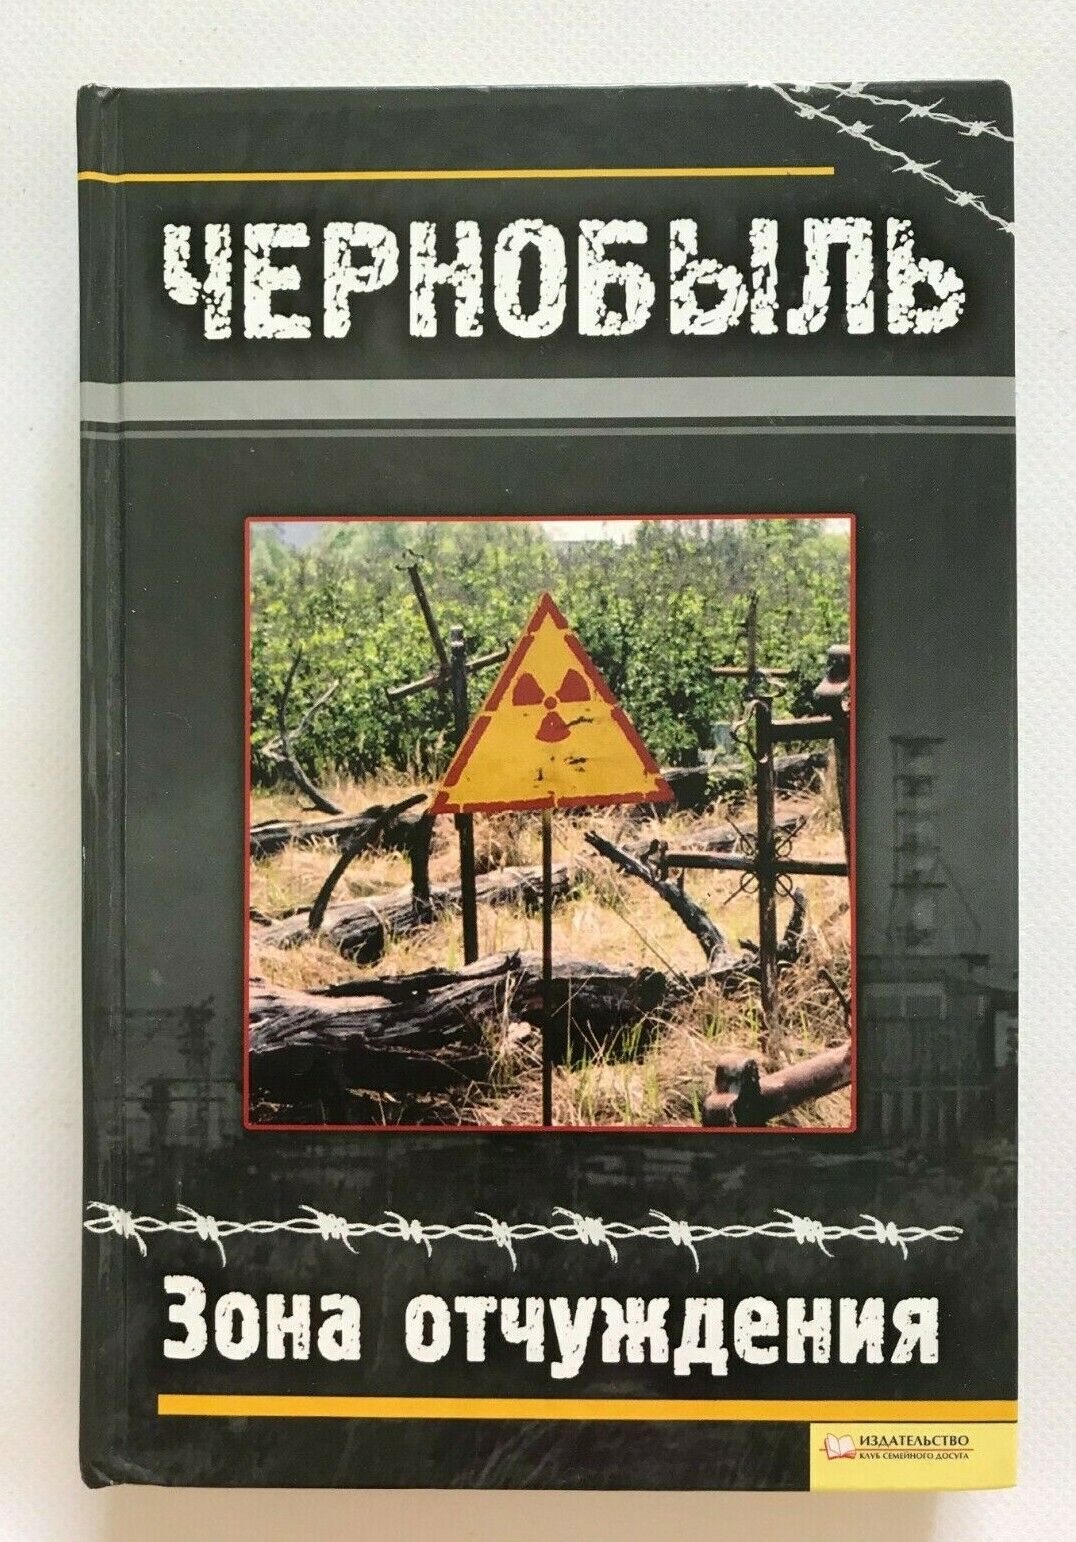 2011 Chernobyl Exclusion Zone Disaster Nuclear reactor ChAES Russian book